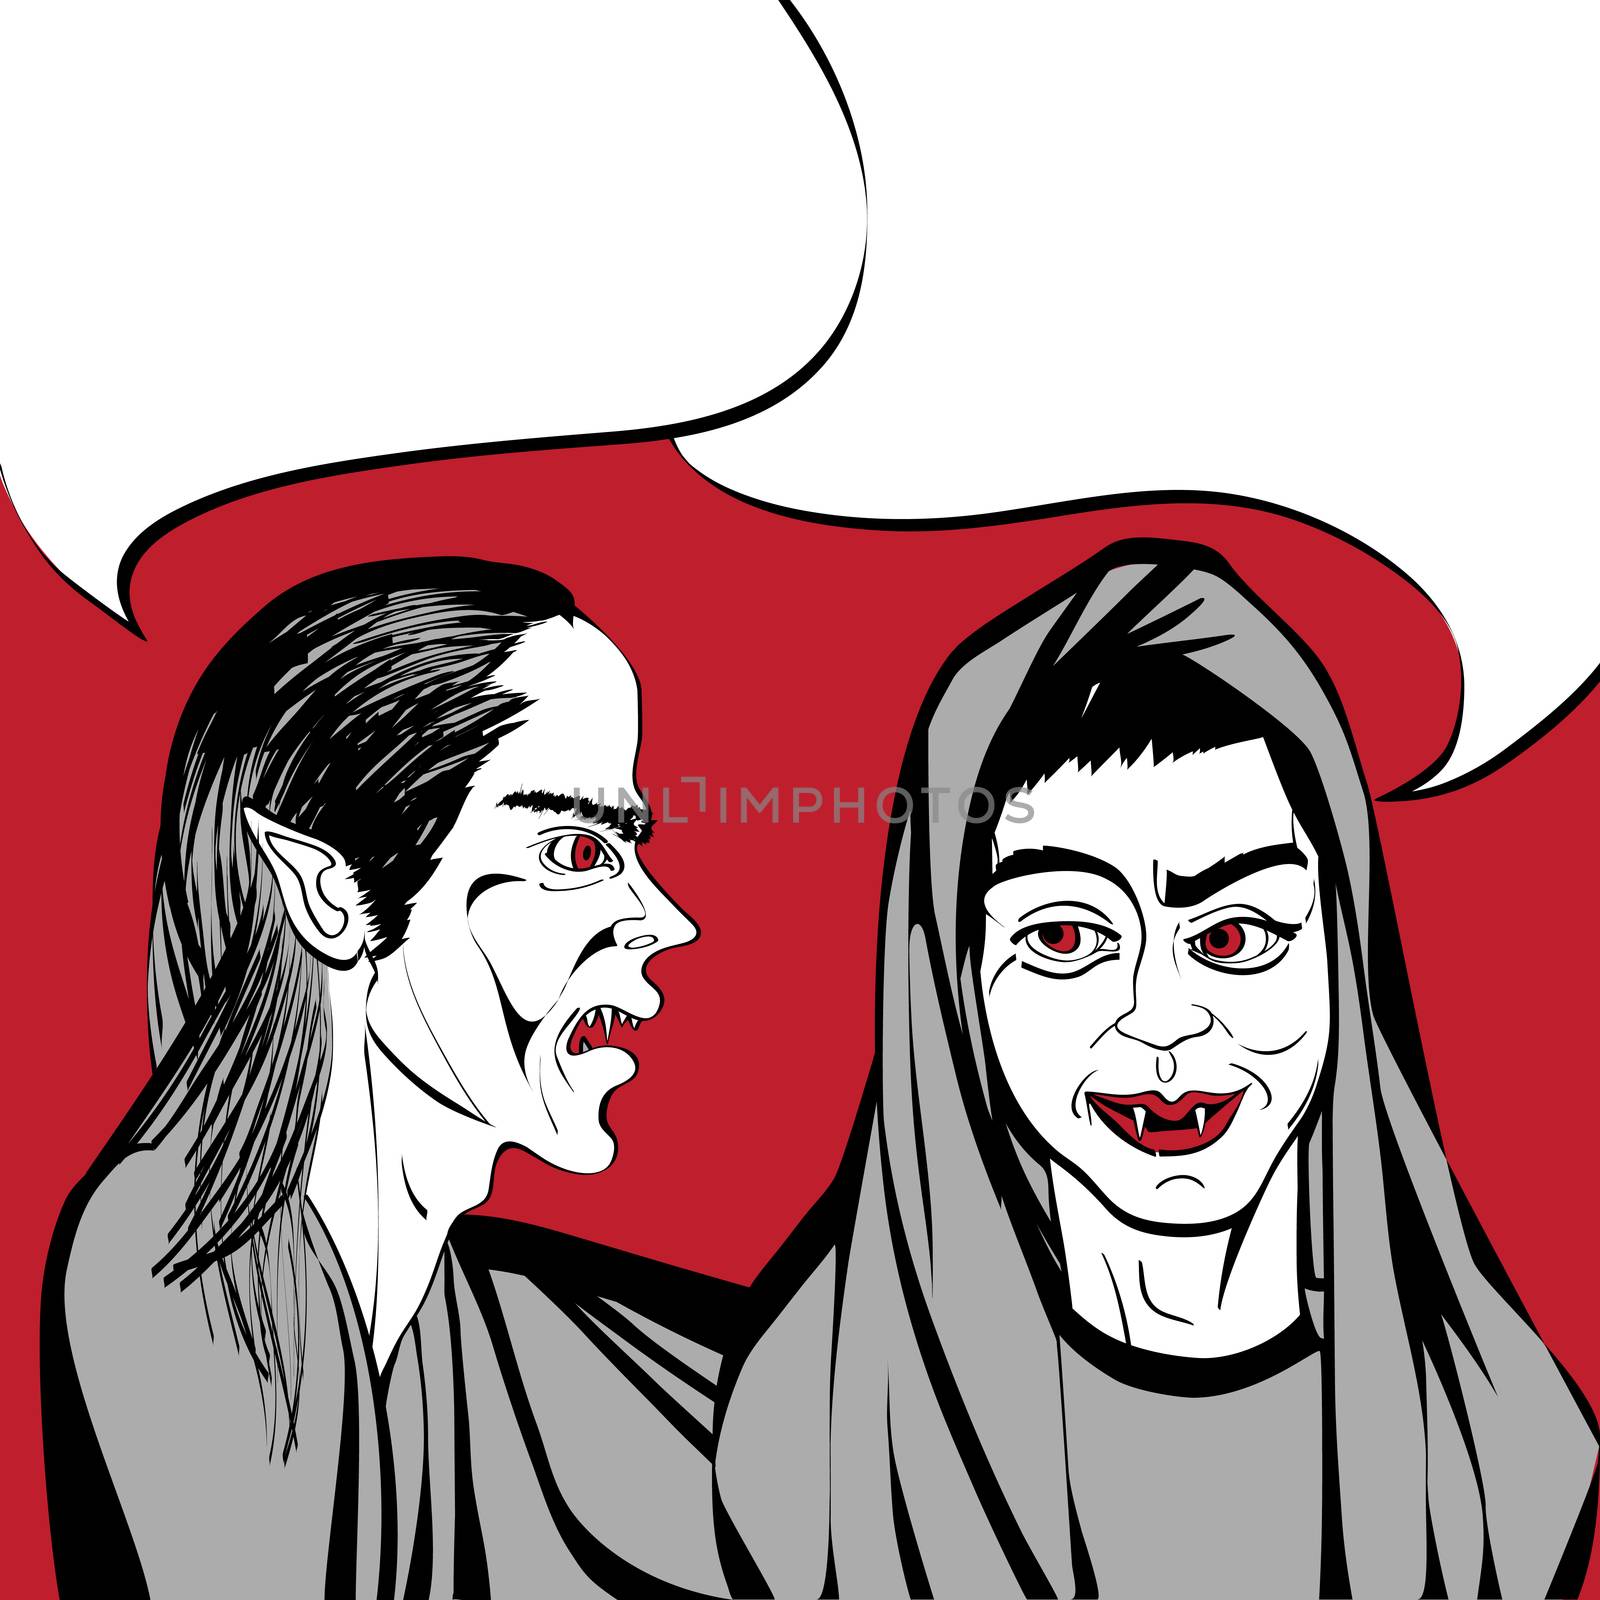 Hand drawn illustration of two vampires talking, funny pop art comic scene with speech bubble on a red background